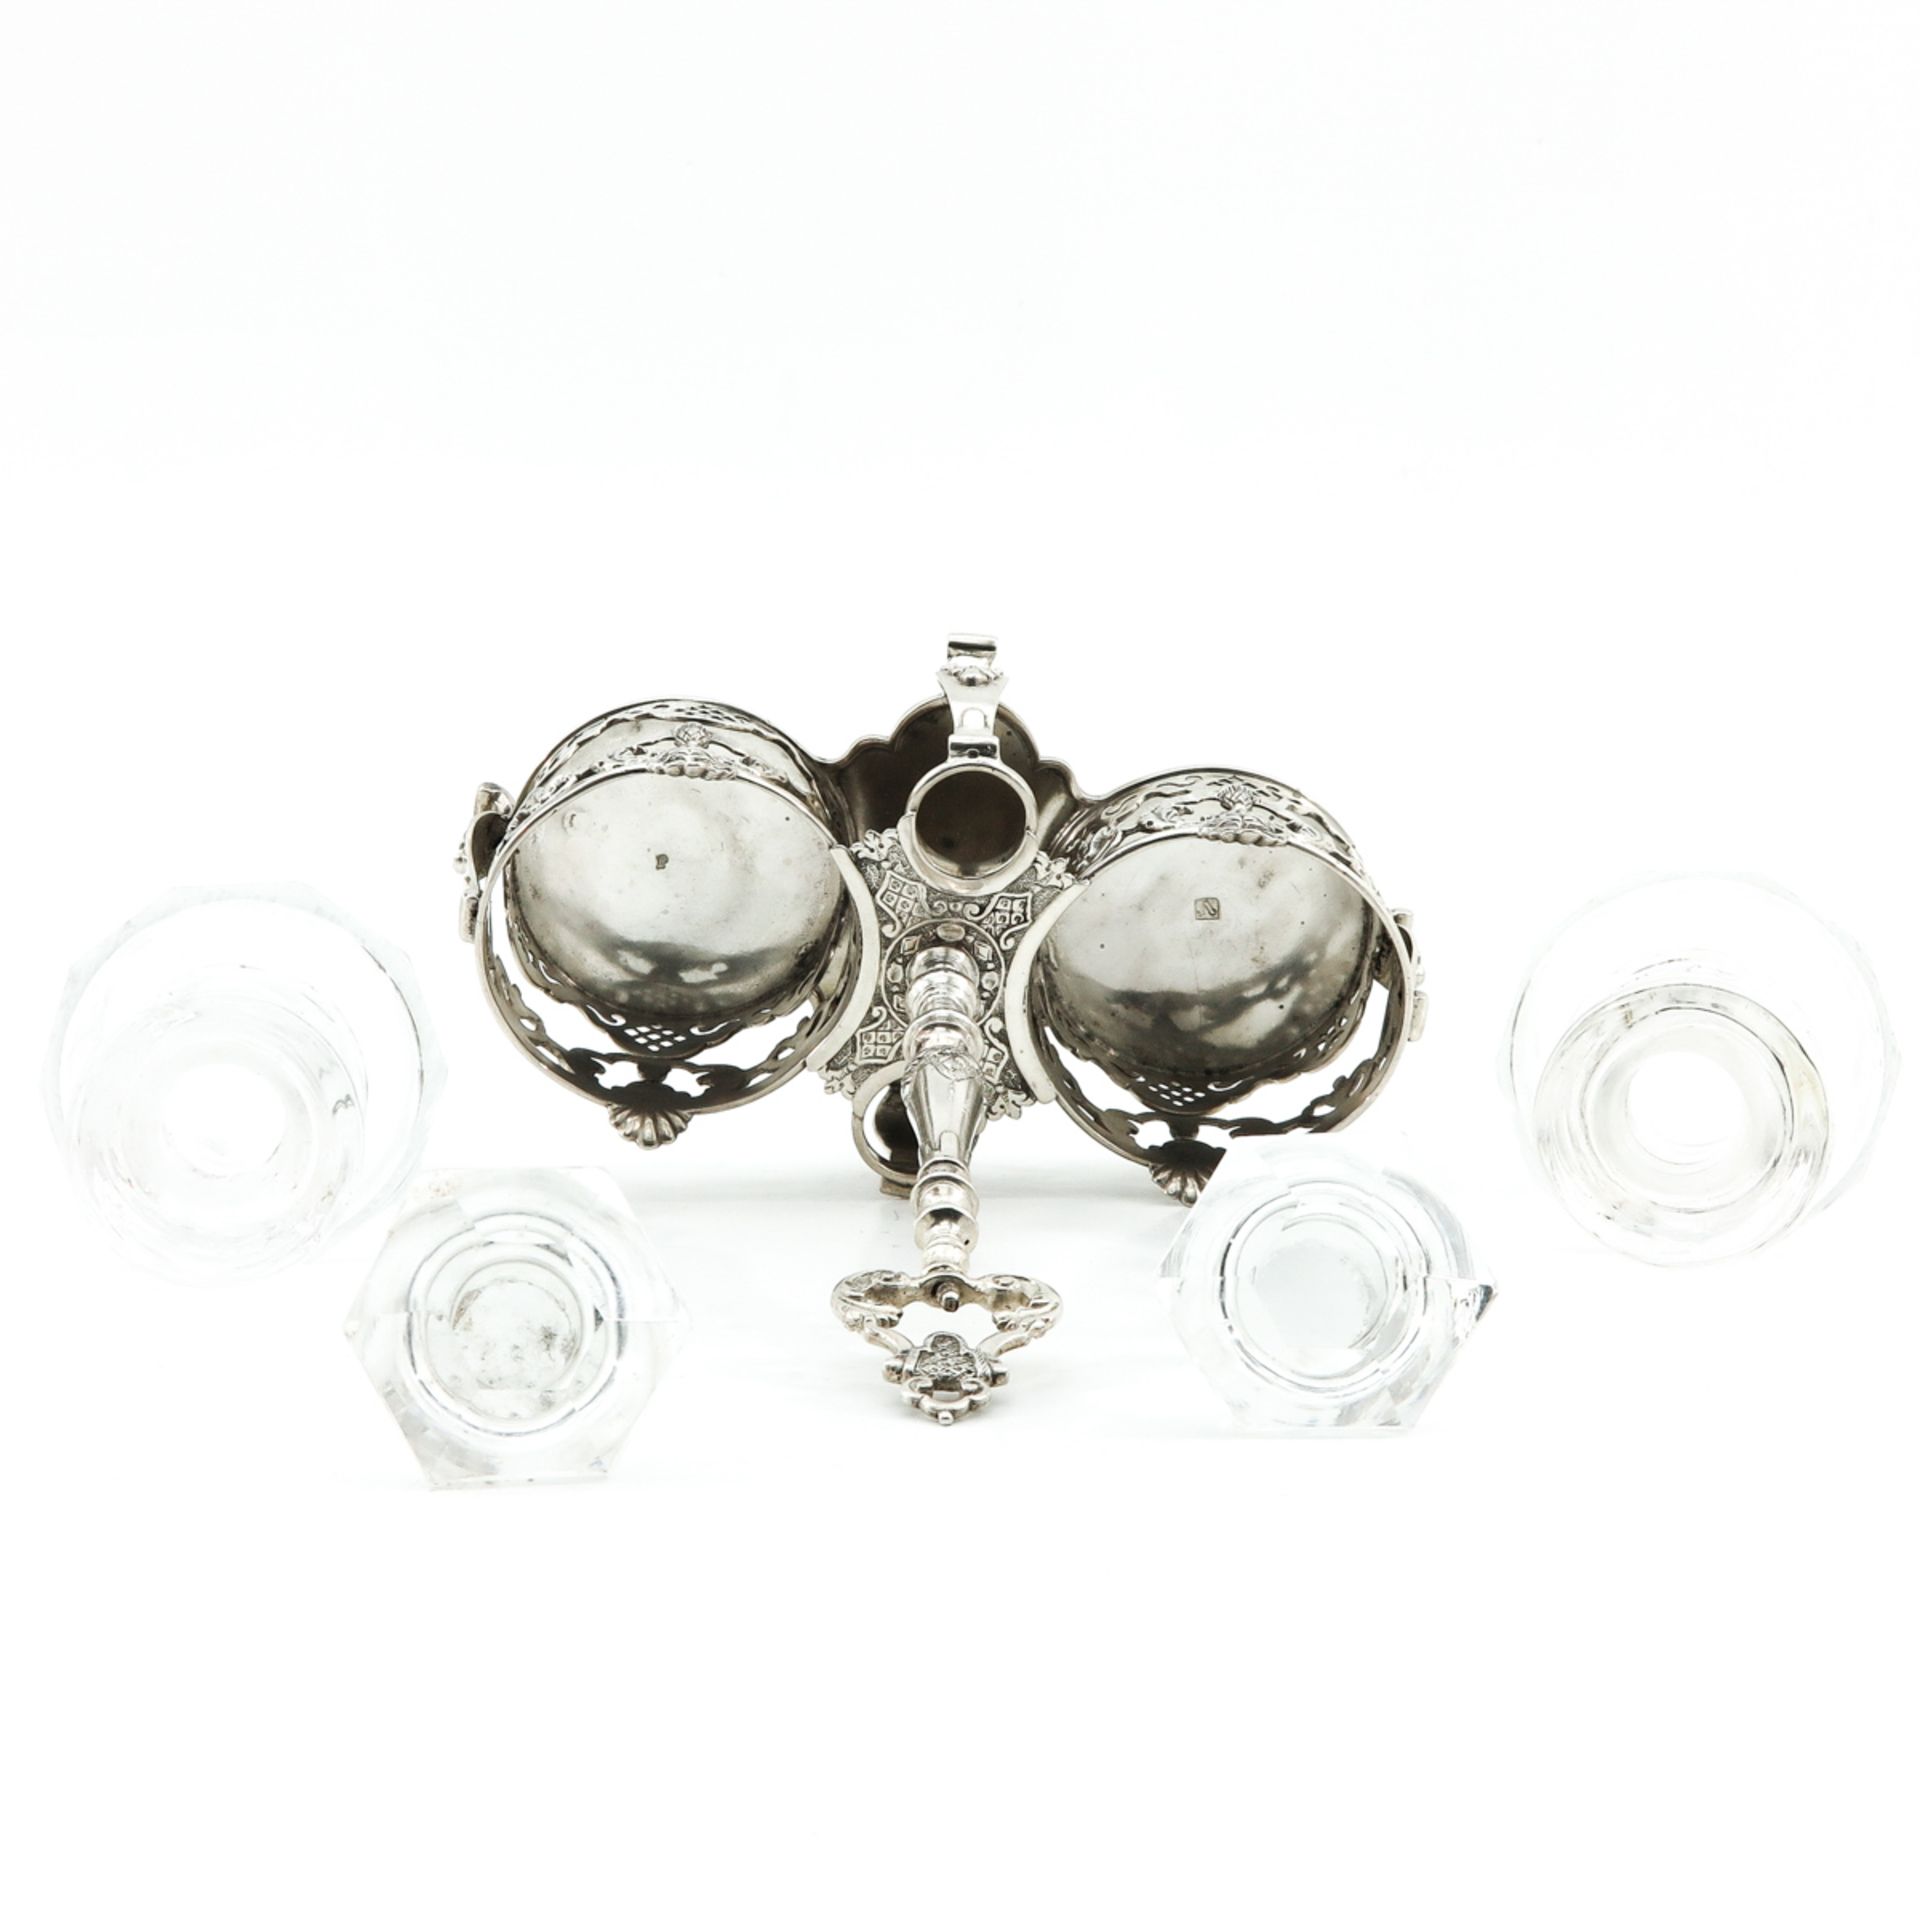 A Silver Oil and Vinegar Set - Image 5 of 10